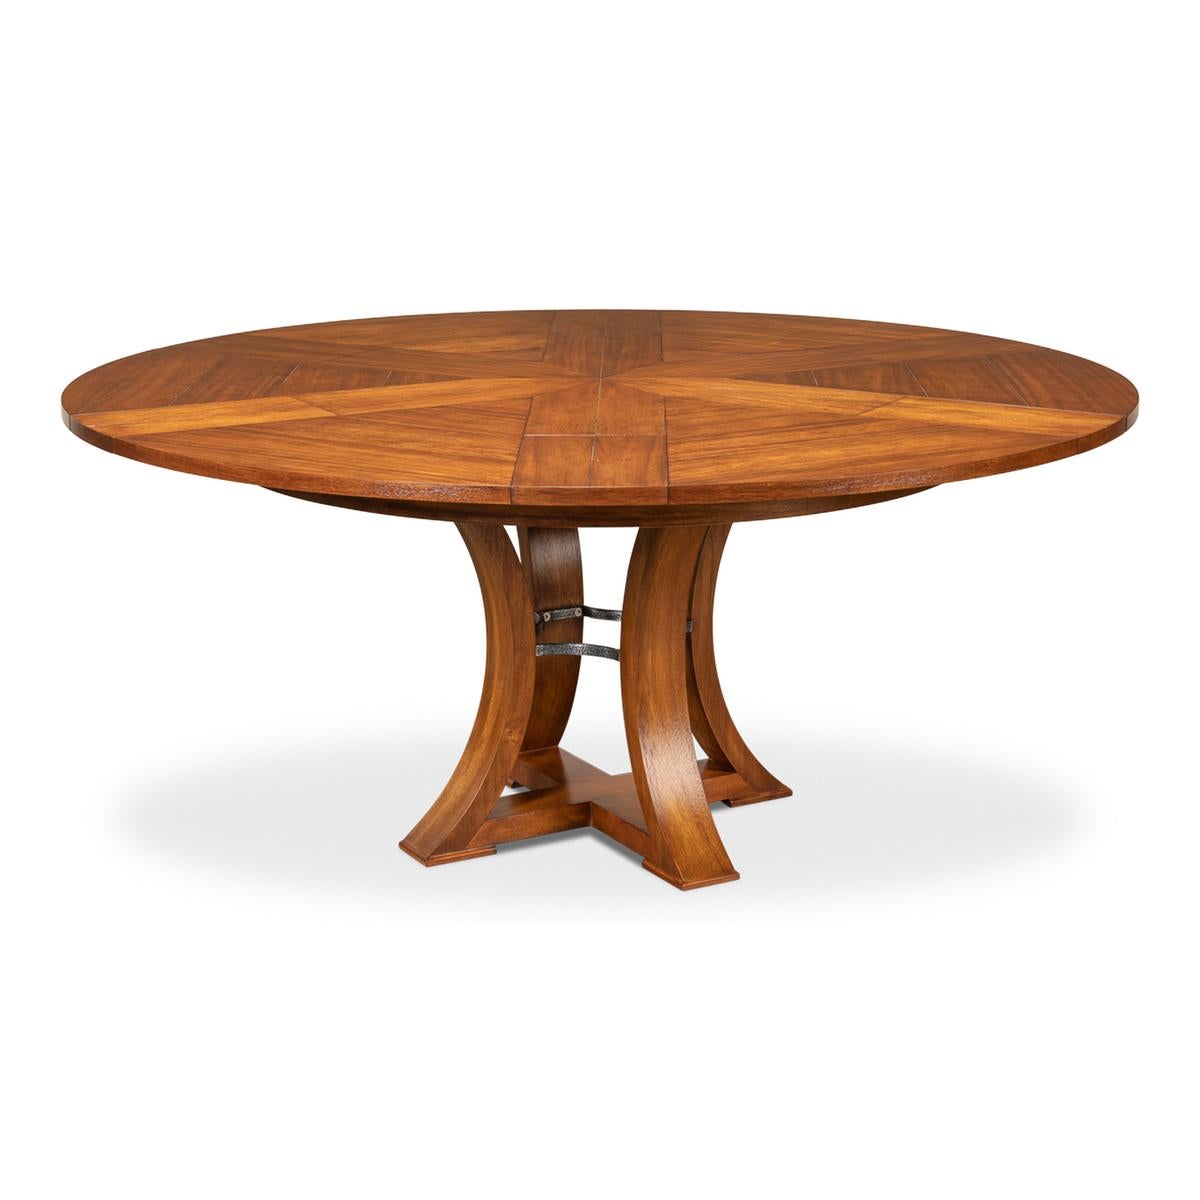 Vietnamese Modern Transitional Dining Table, 70, Tobacco Finish For Sale